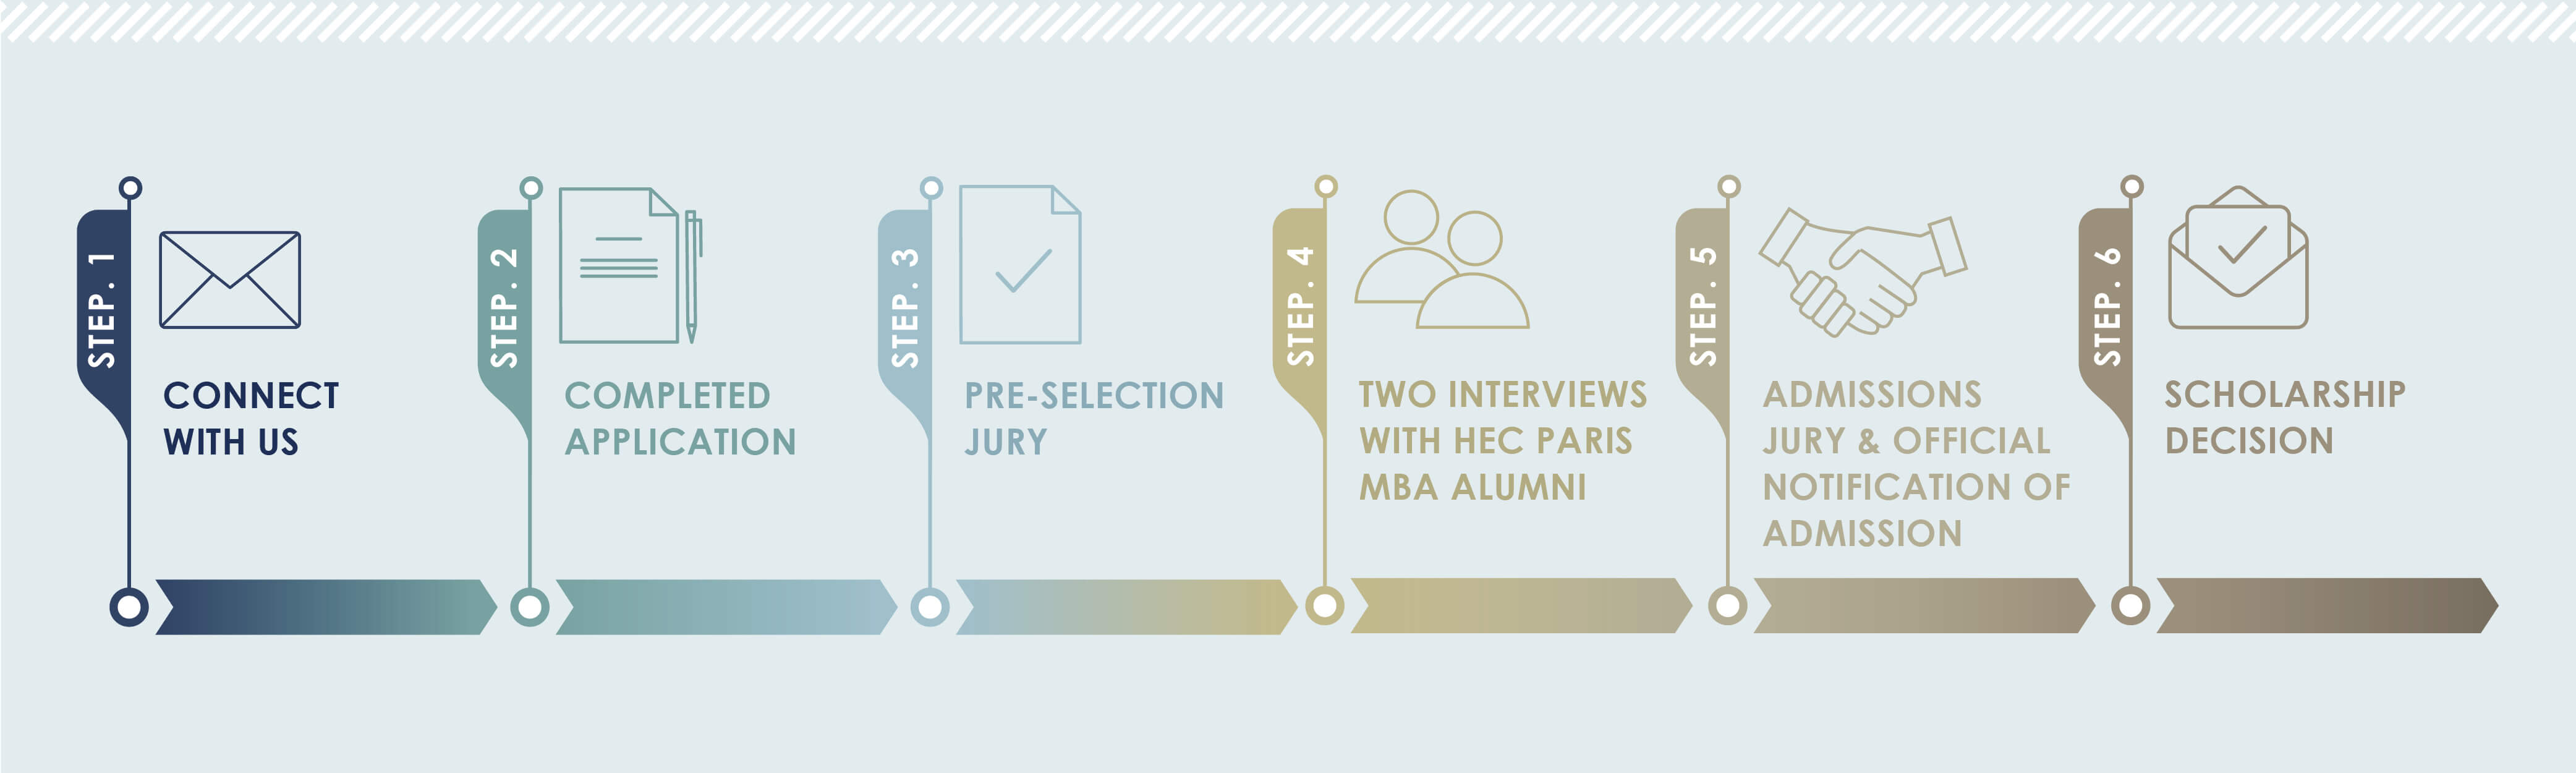 The HEC Paris MBA is proud to have a 5-week application process